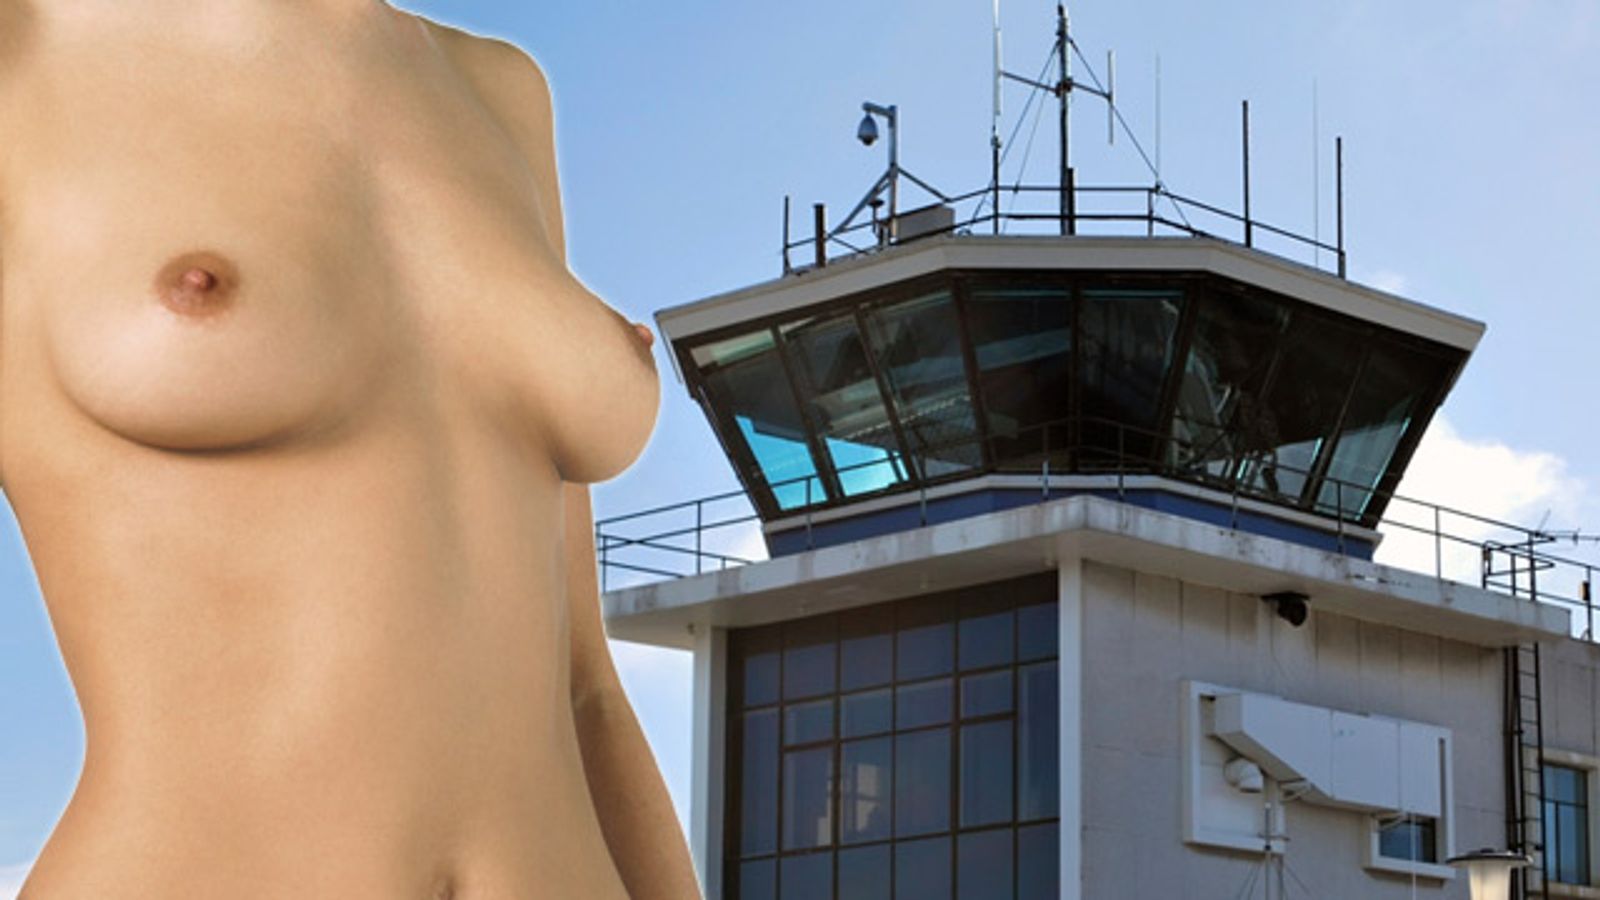 Porn Abuse Part of Air Traffic Controllers' $2m Harassment Suit